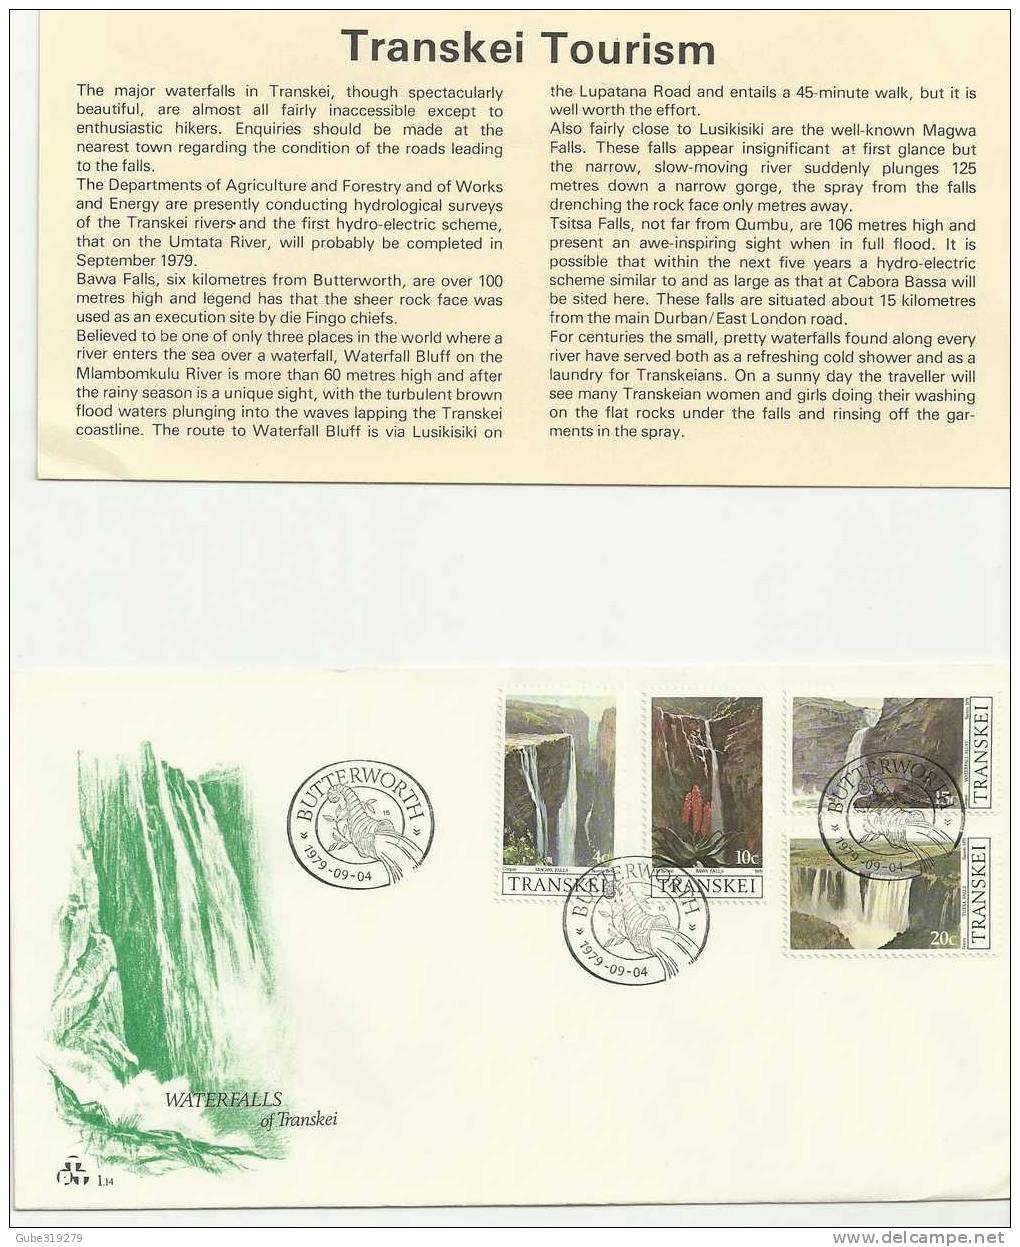 TRANSKEI-1979- 3 PIECES  FDC WATERFALLS  TRANSKEI  - 04 SEPT 1979  WITH 4 STAMPS OF 4-10-15-20  CENTS  - REF.08 - Transkei